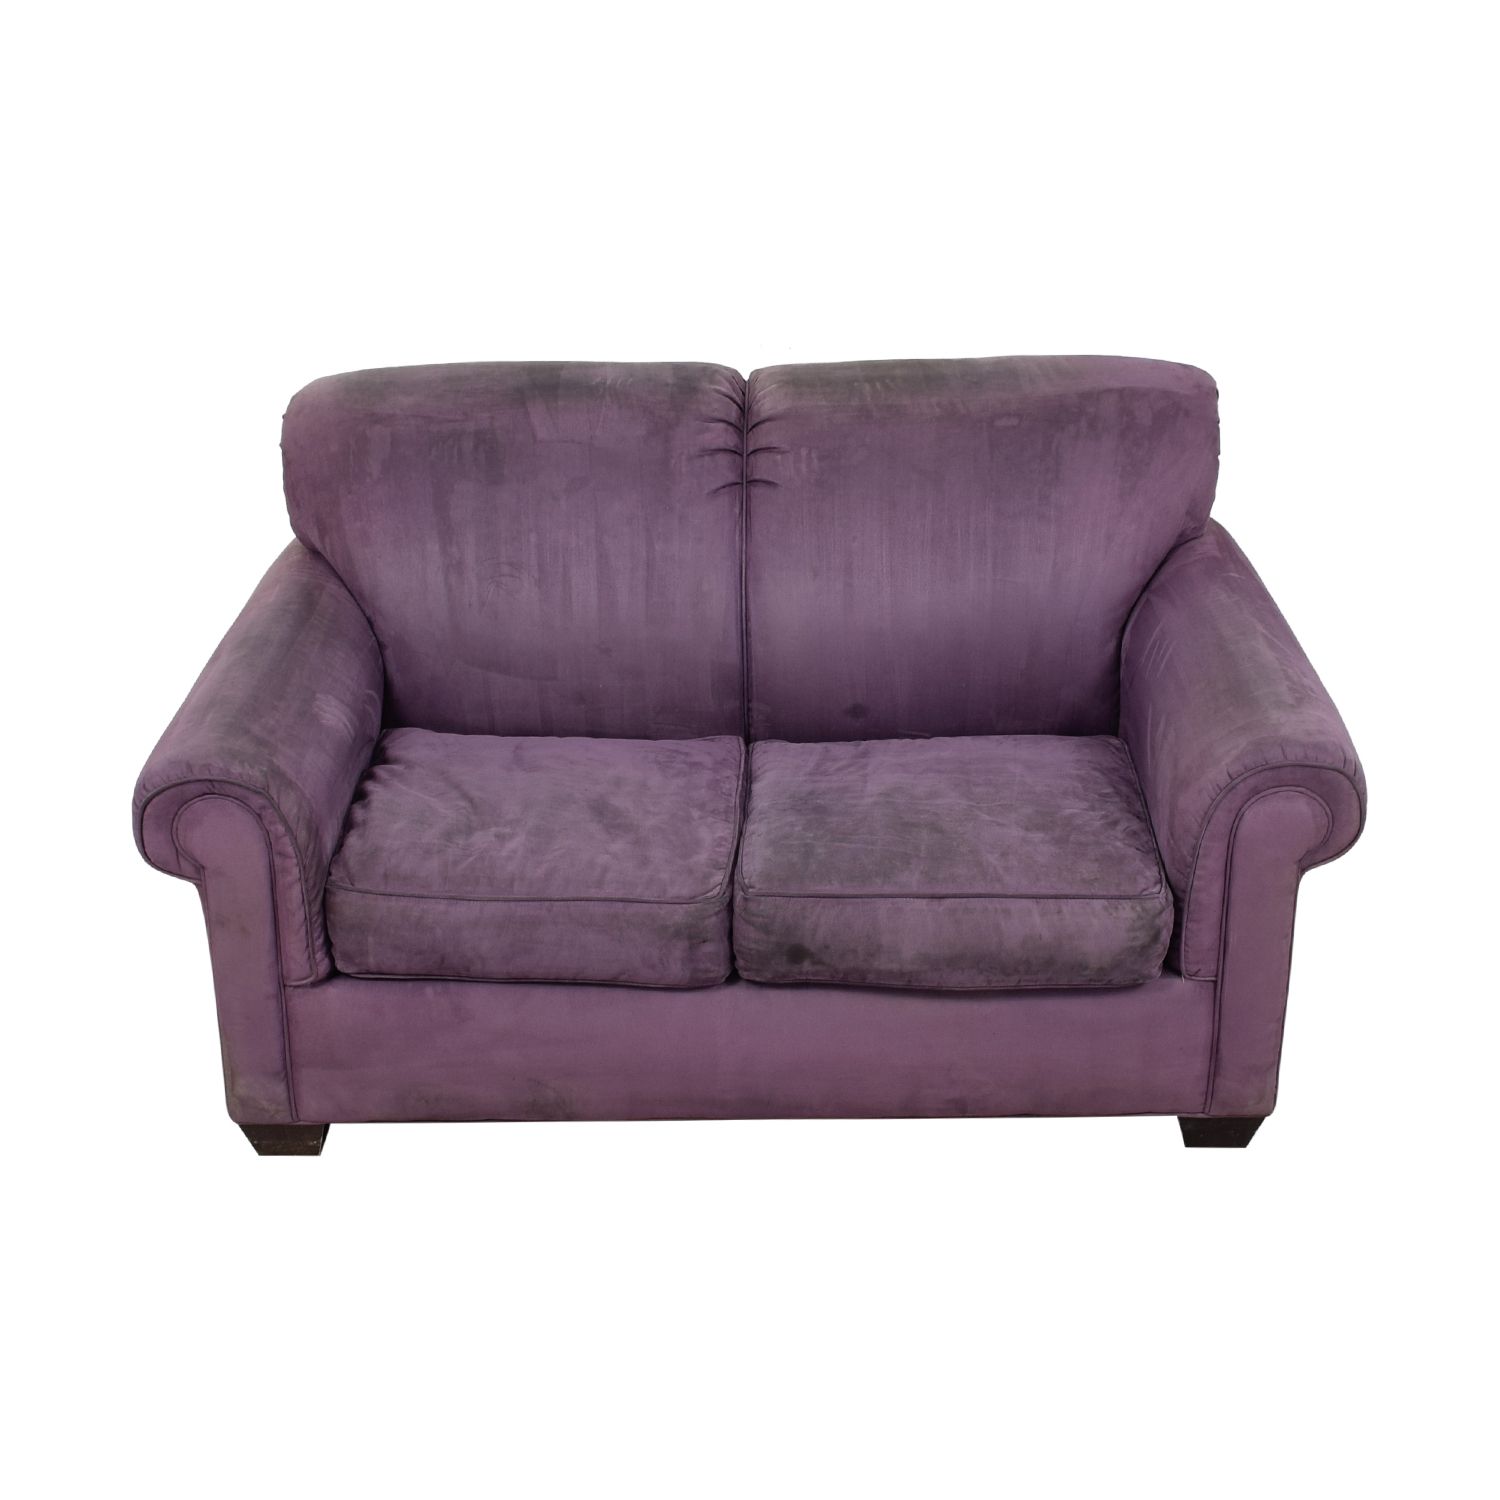 Used Loveseats Under $500 Pertaining To Most Current Owens Loveseats With Cushion (View 15 of 20)